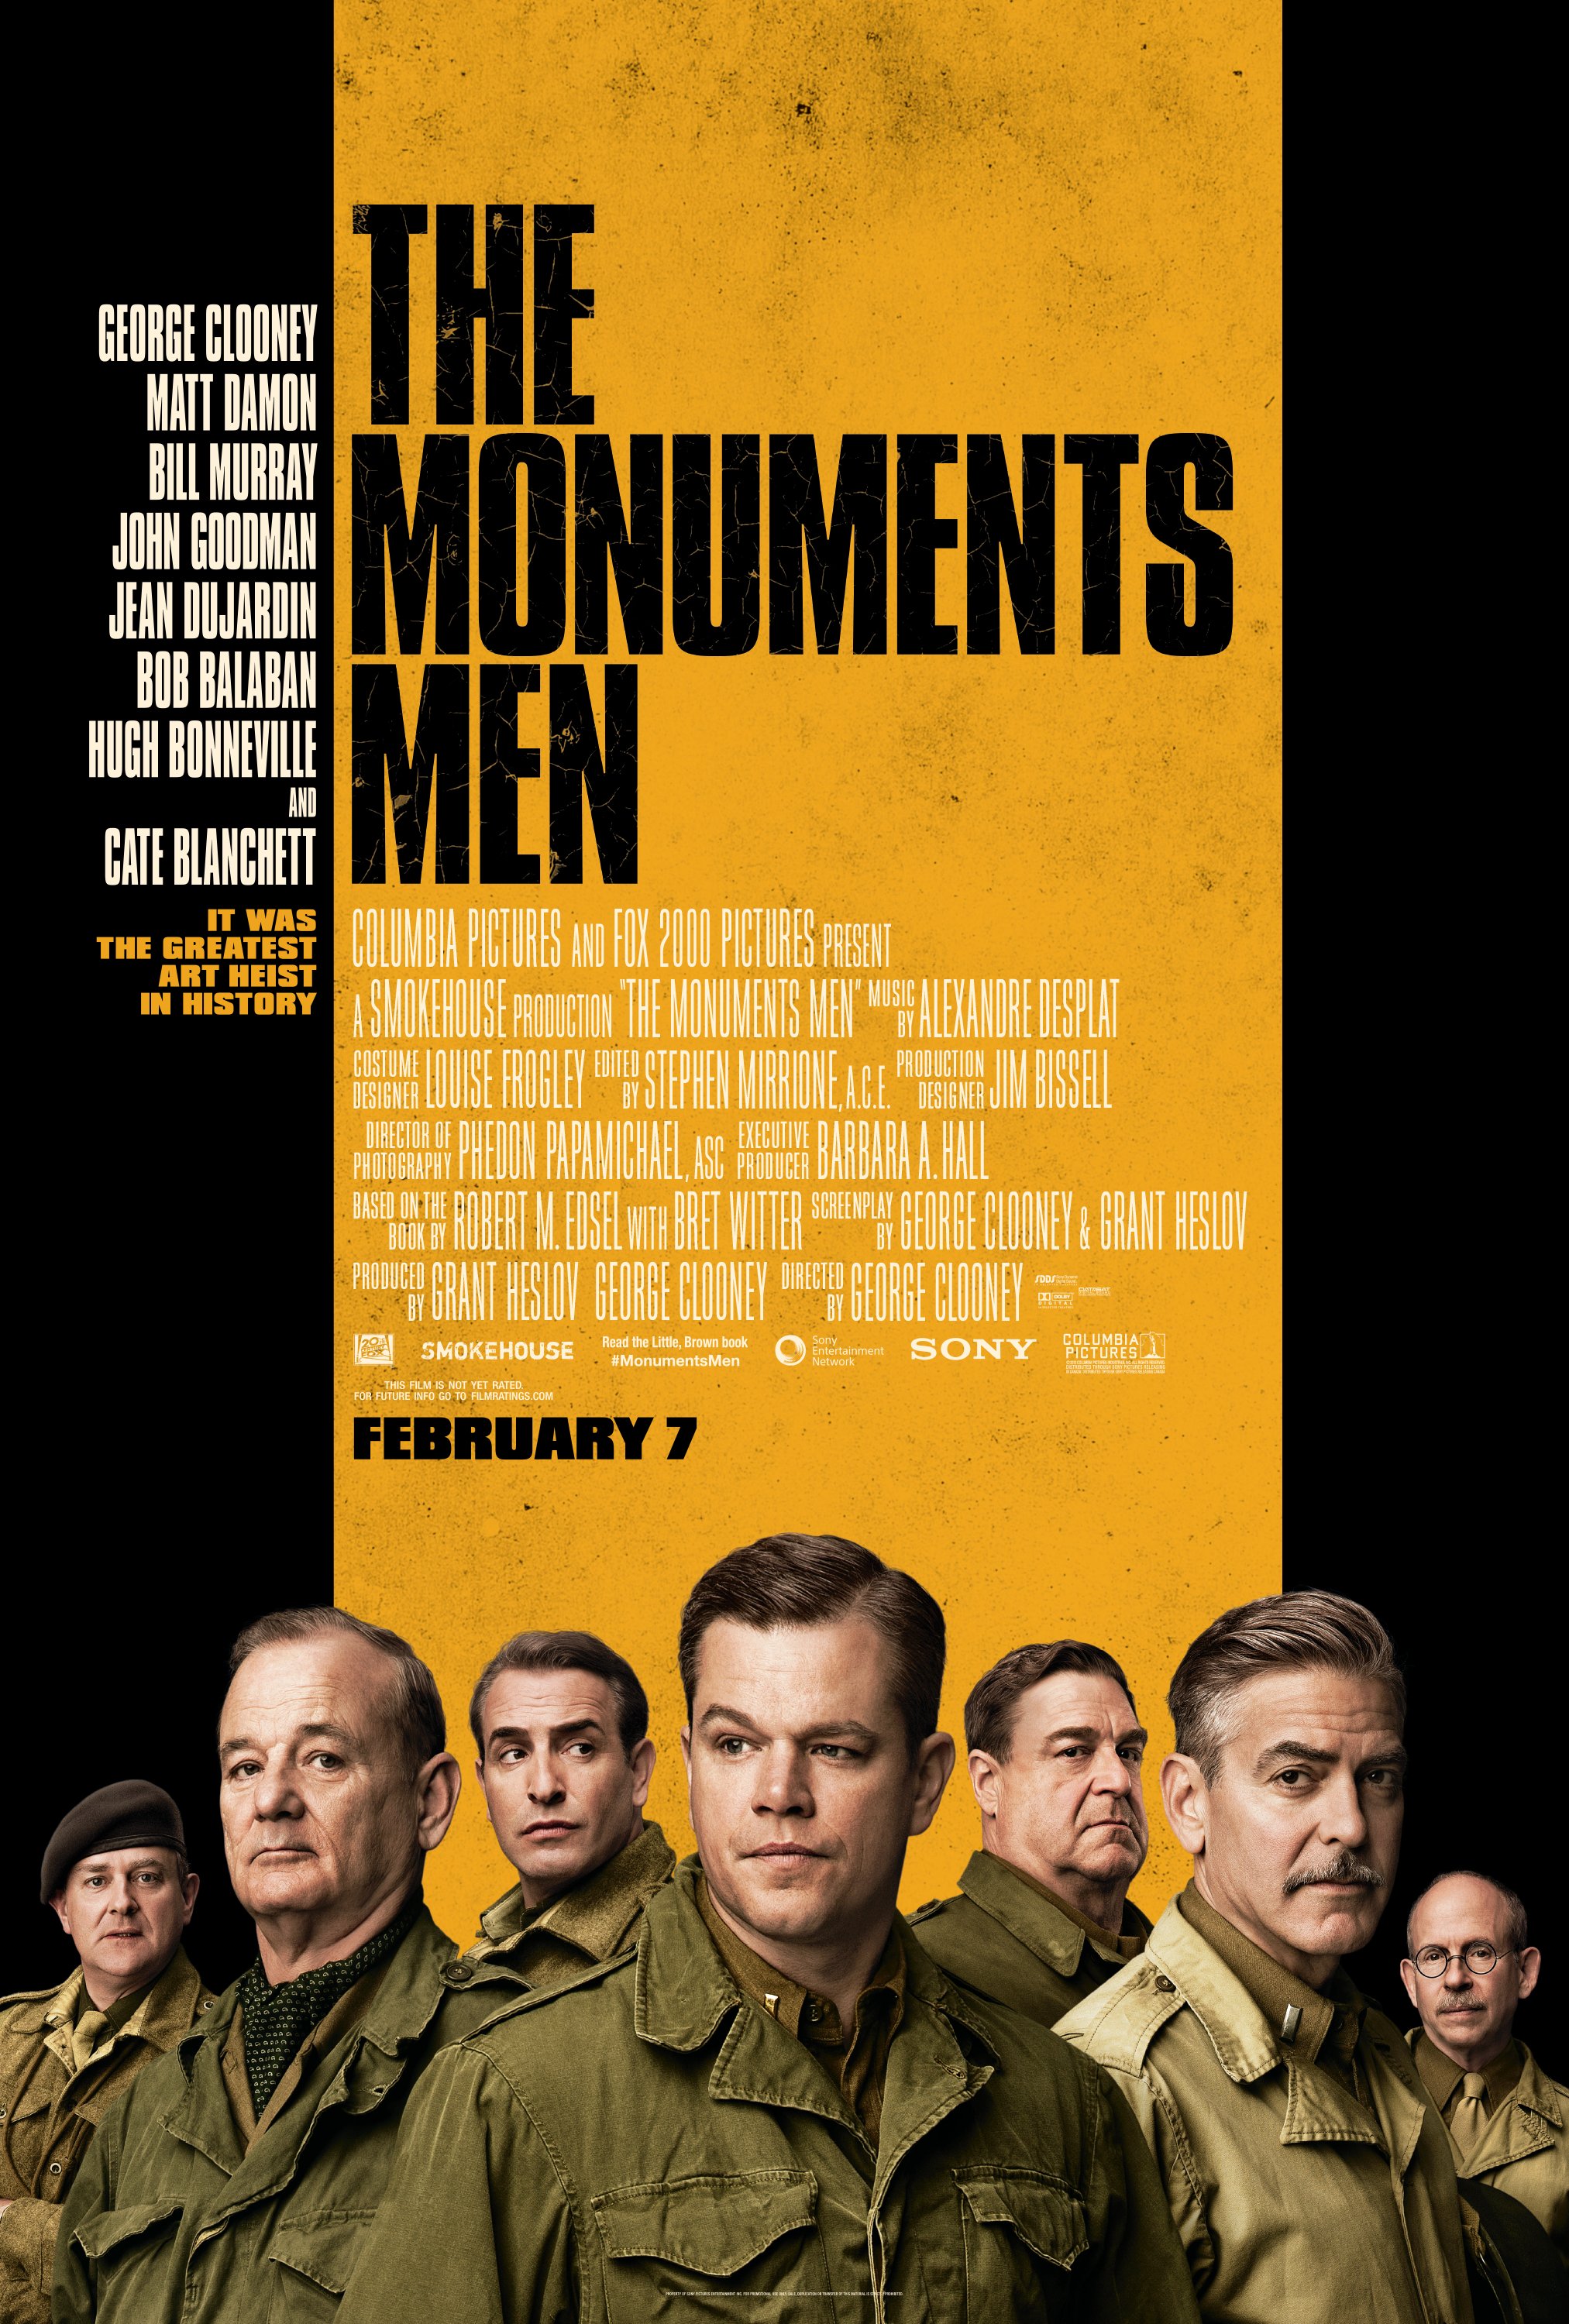 Cover Art for "The Monuments Men"